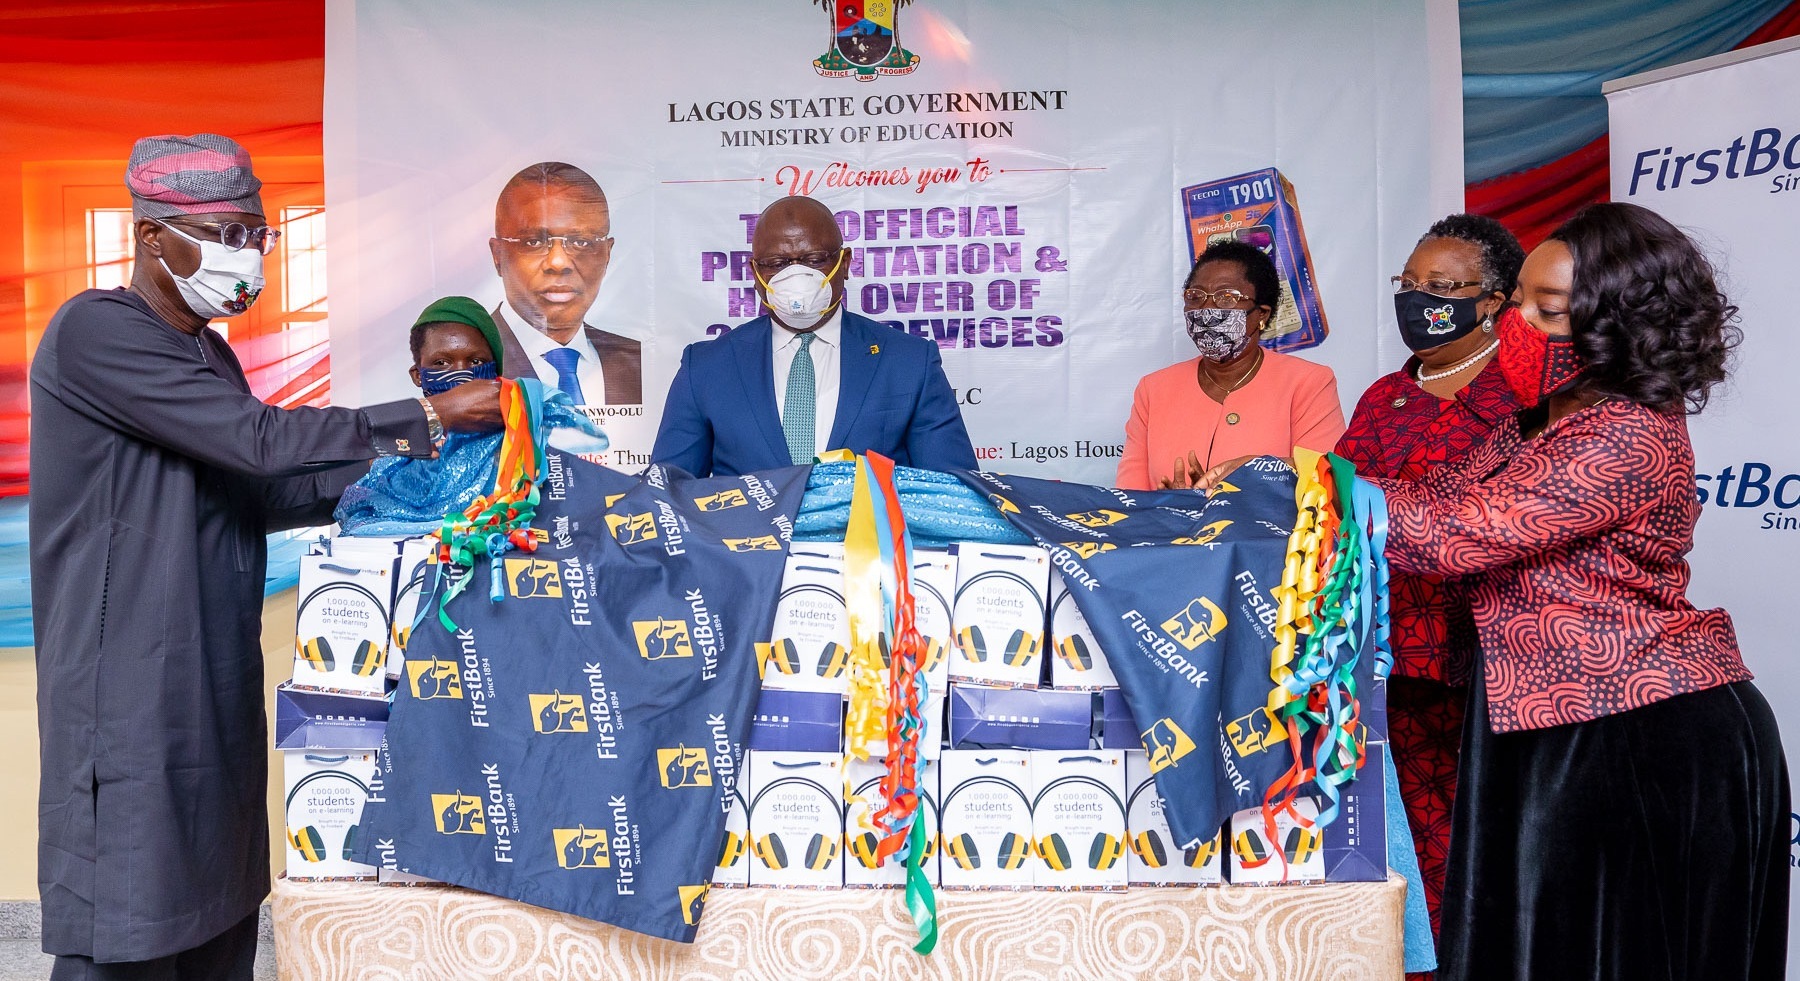 L-R: Lagos State Governor, Mr. Babajide Sanwo-Olu; beneficiary, Miss Sherifat Umar of Elegbata Senior High school, Lagos Island; Managing Director/CEO, First Bank PLC, Dr. Adeola Adeduntan; Permanent Secretary, Ministry of Education; Mrs. Abosede Adelaja; Commissioner for Education; Mrs. Folasade Adefisayo and wife of the Governor, Dr. Ibijoke, during the unveiling of the 20,000 E-Learning devices for Lagos State Schools, presented by First Bank at the Lagos House, Marina, on Thursday, June 11, 2020.